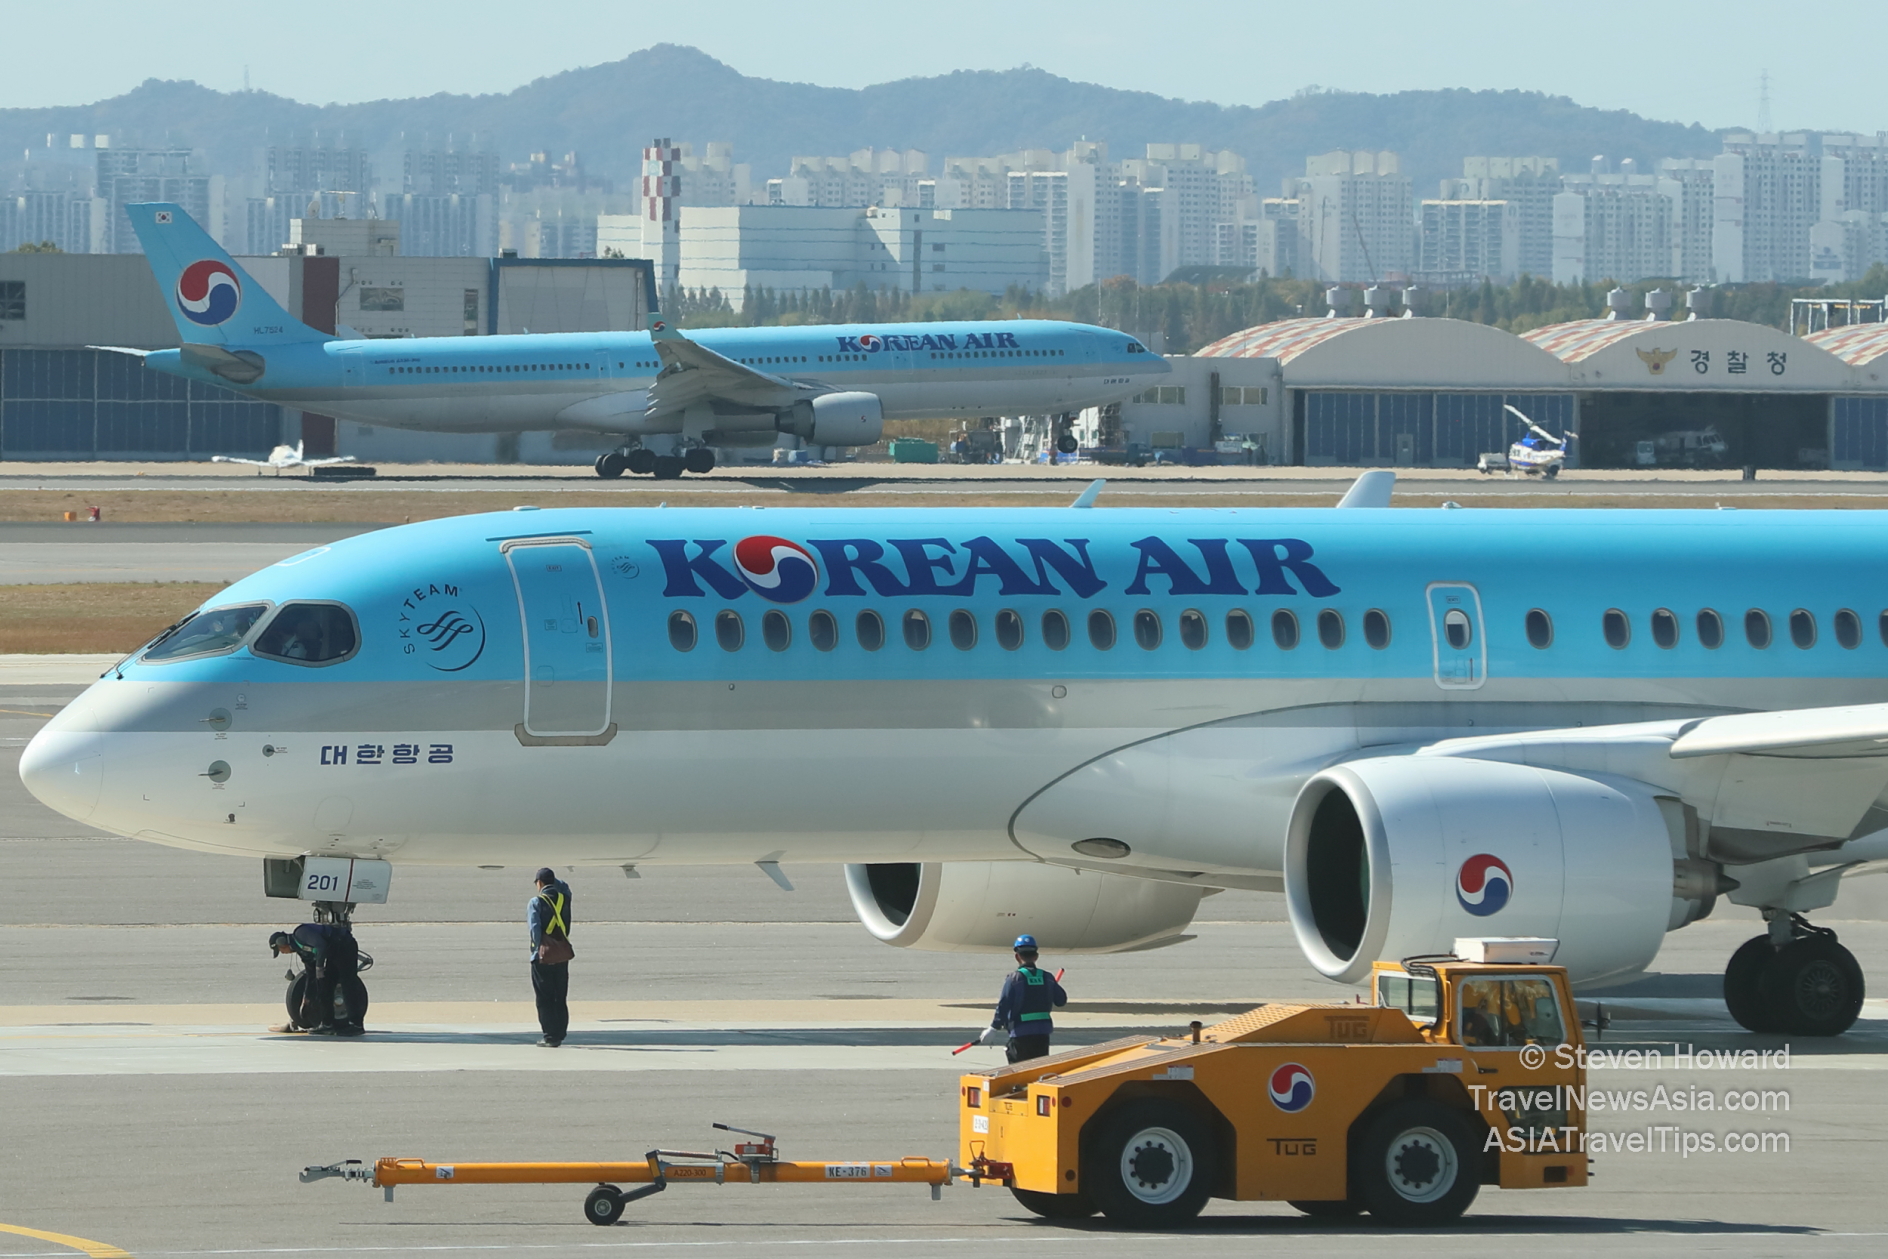 Korean Air Aircraft at Gimpo Airport near Seoul. Picture by Steven Howard of TravelNewsAsia.com Click to enlarge.